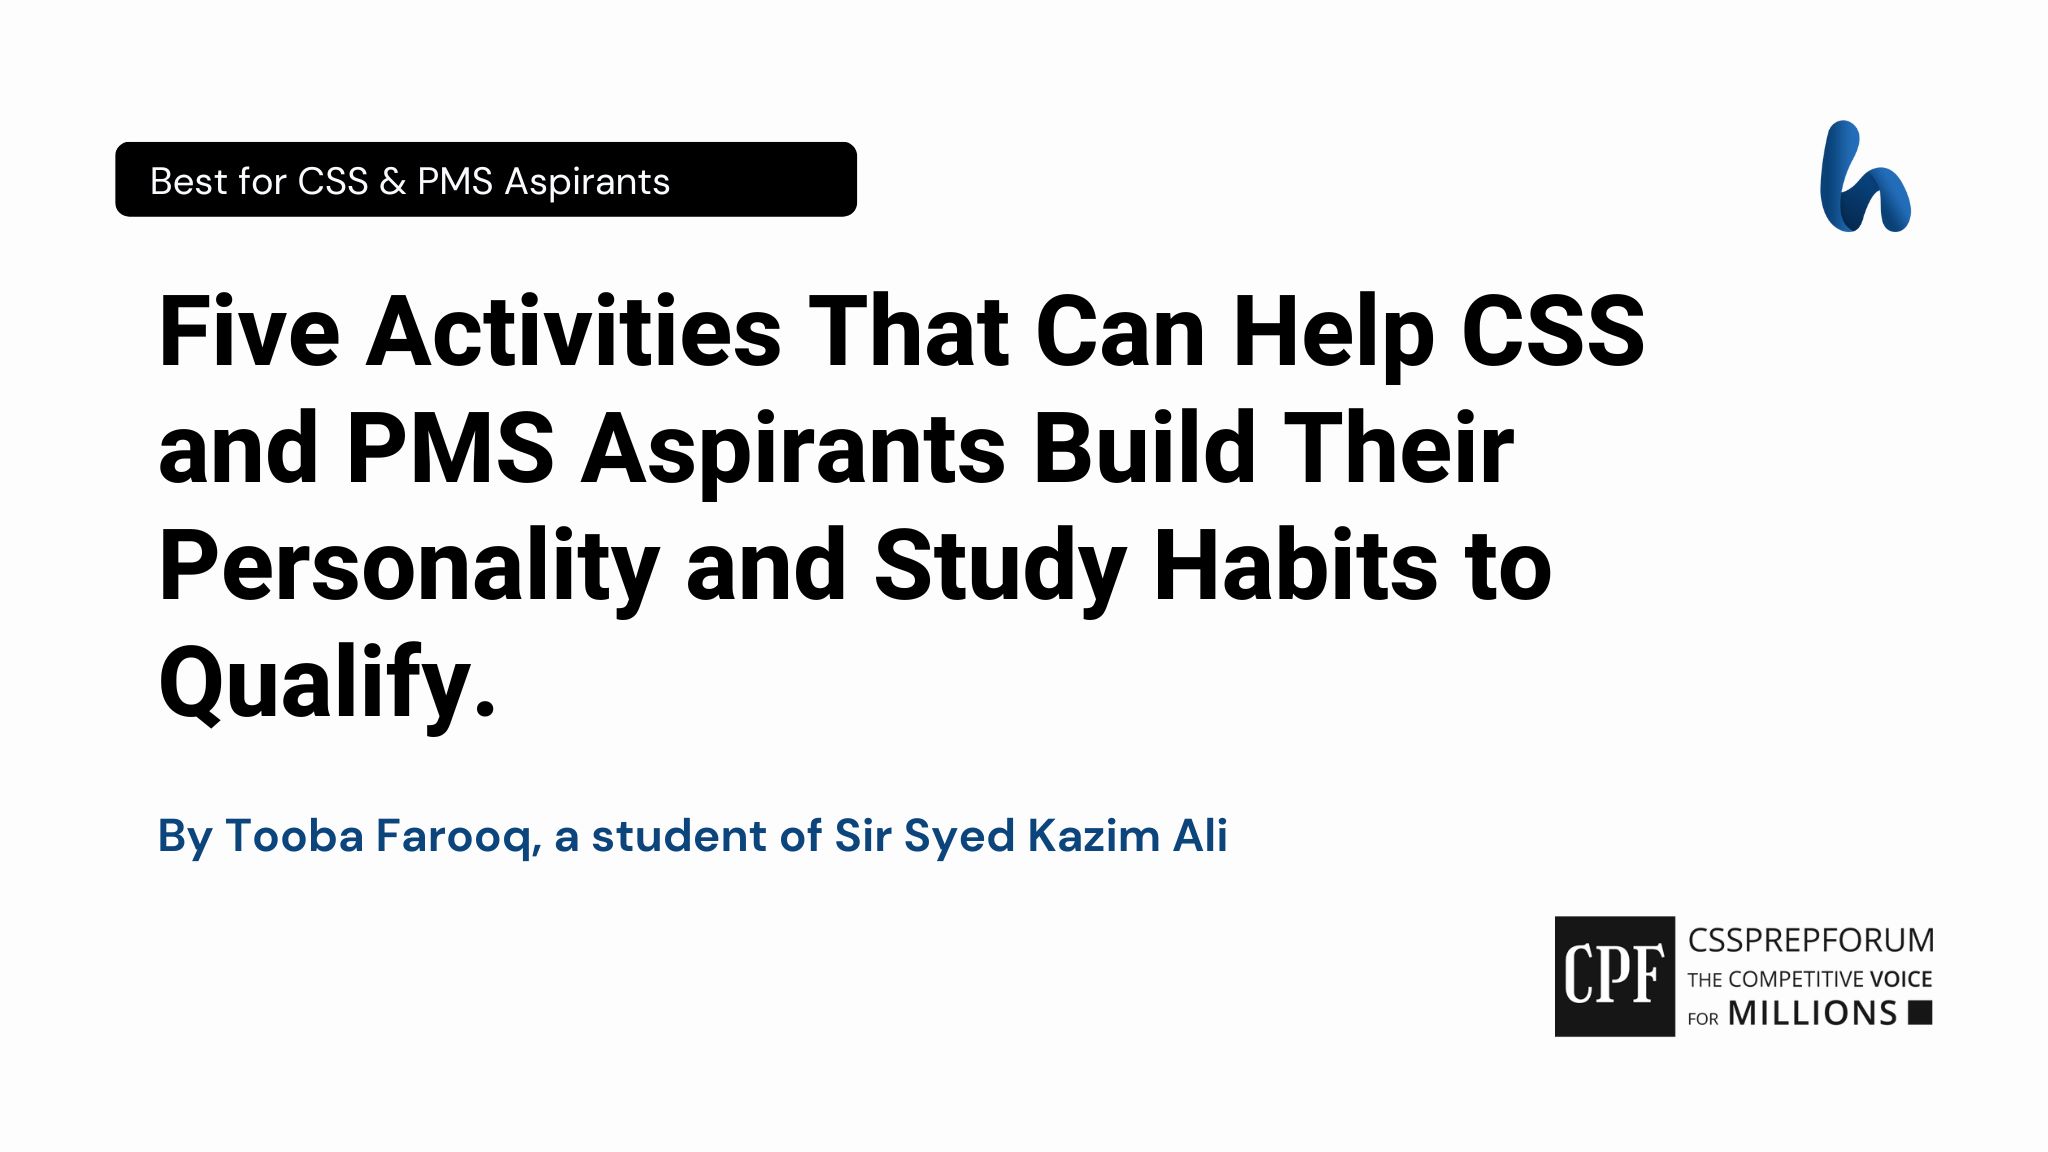 Five Activities That Can Help CSS and PMS Aspirants Build Their Personality And Study Habits to Qualify by Tooba Farooq